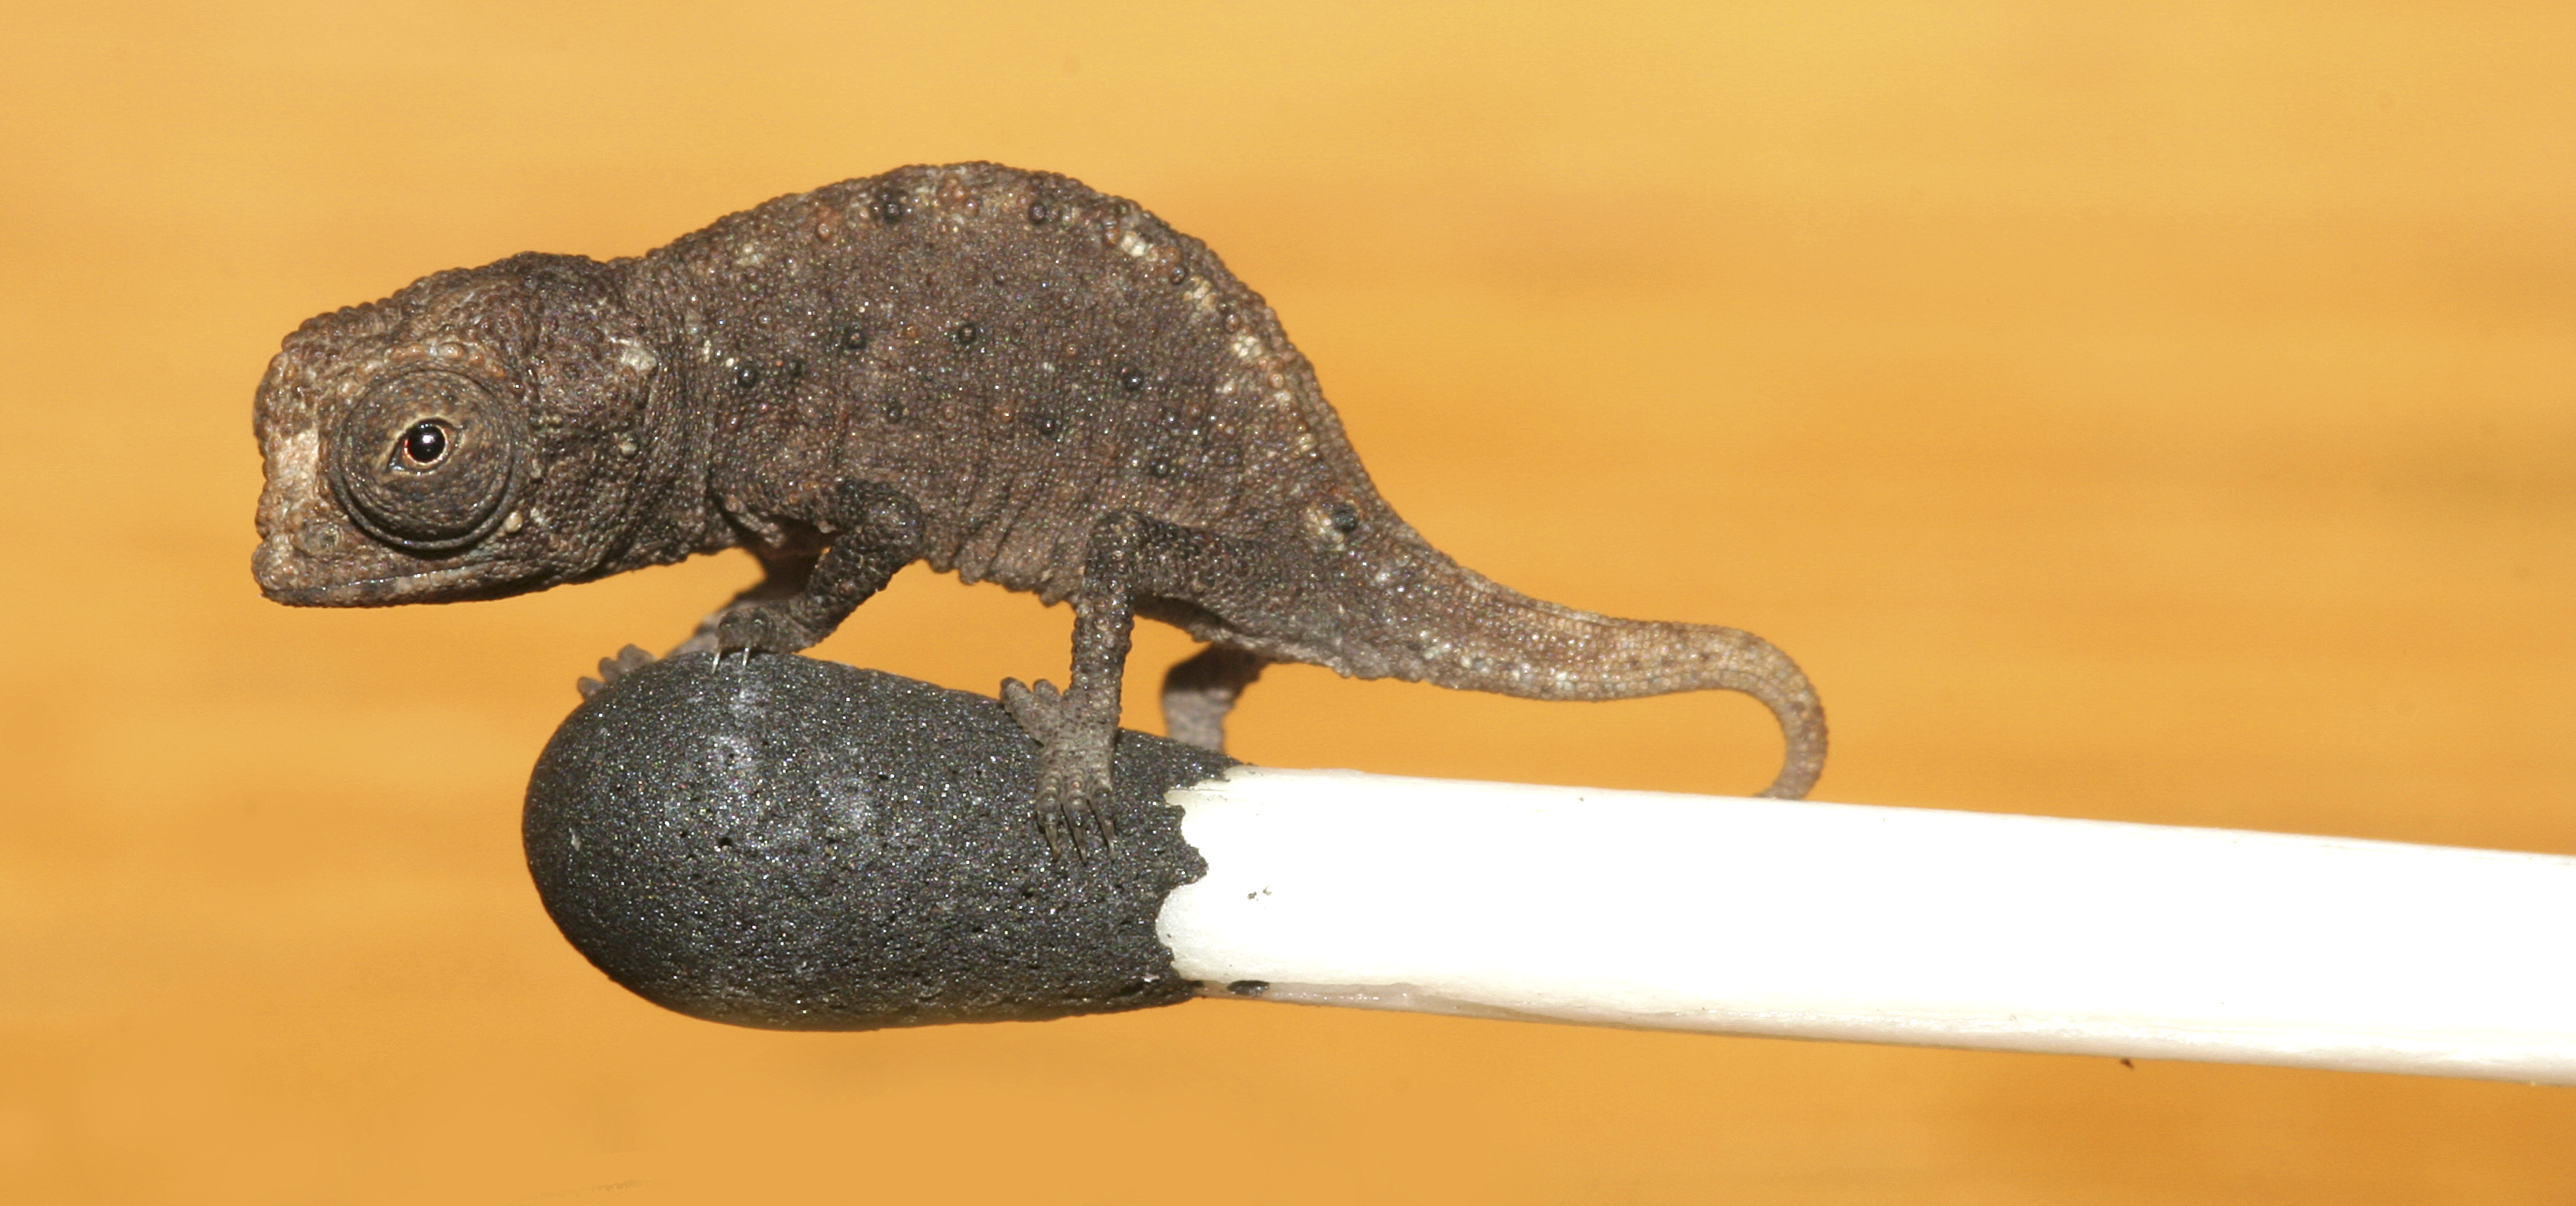 A file picture shows a ‚Brookesia micra‘ chameleon on a matchhead in Madagascar